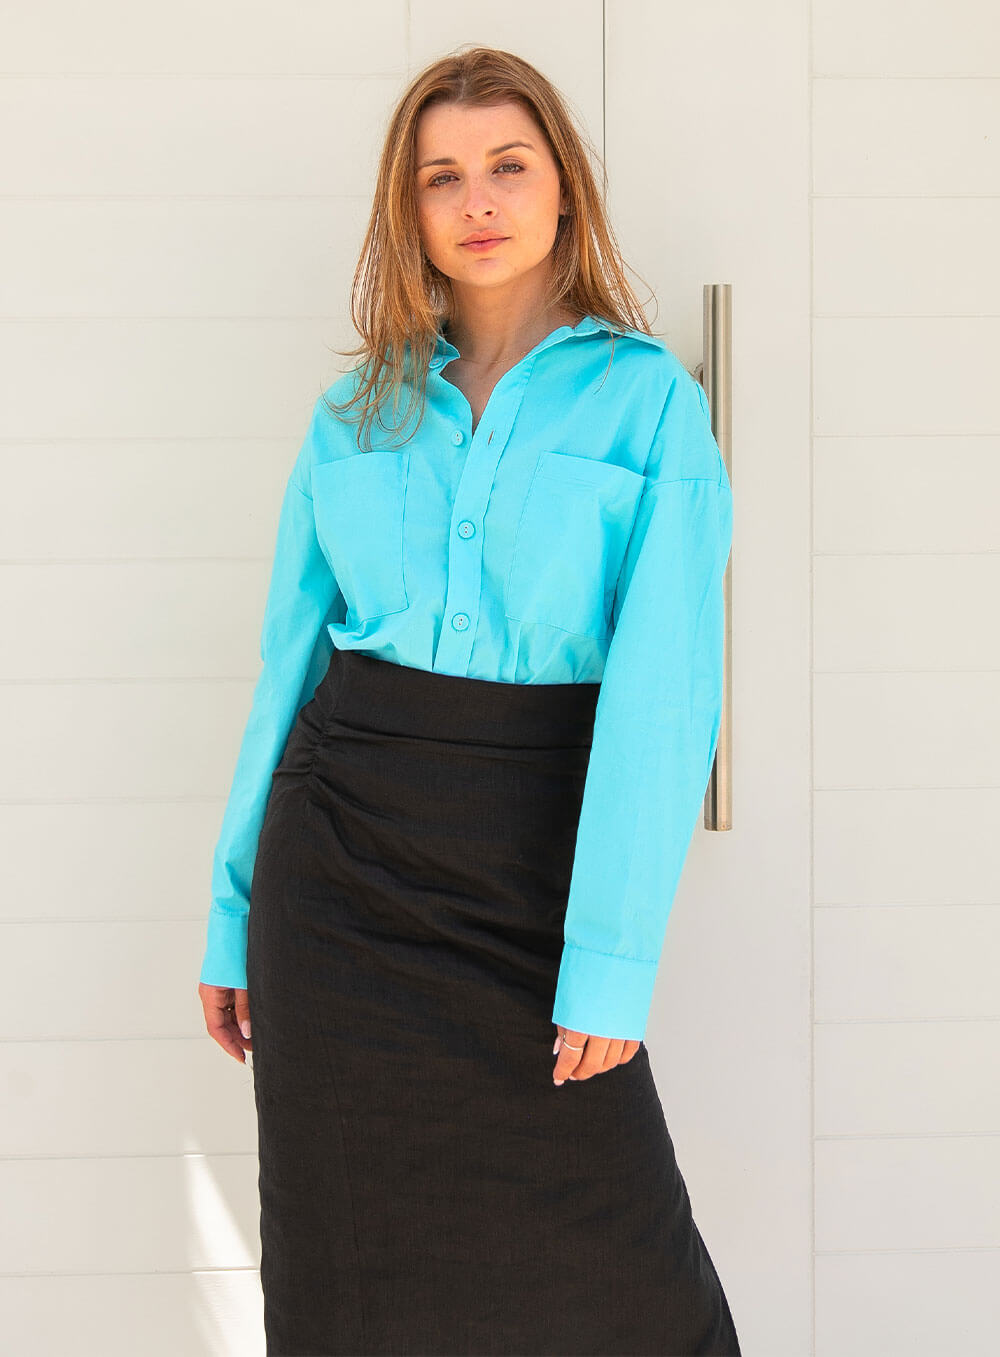 The Sienna Poplin Shirt in skye blue features button through front, scooped shirt hem style, self fabric covered buttons, luxe soft and breathable cotton poplin base